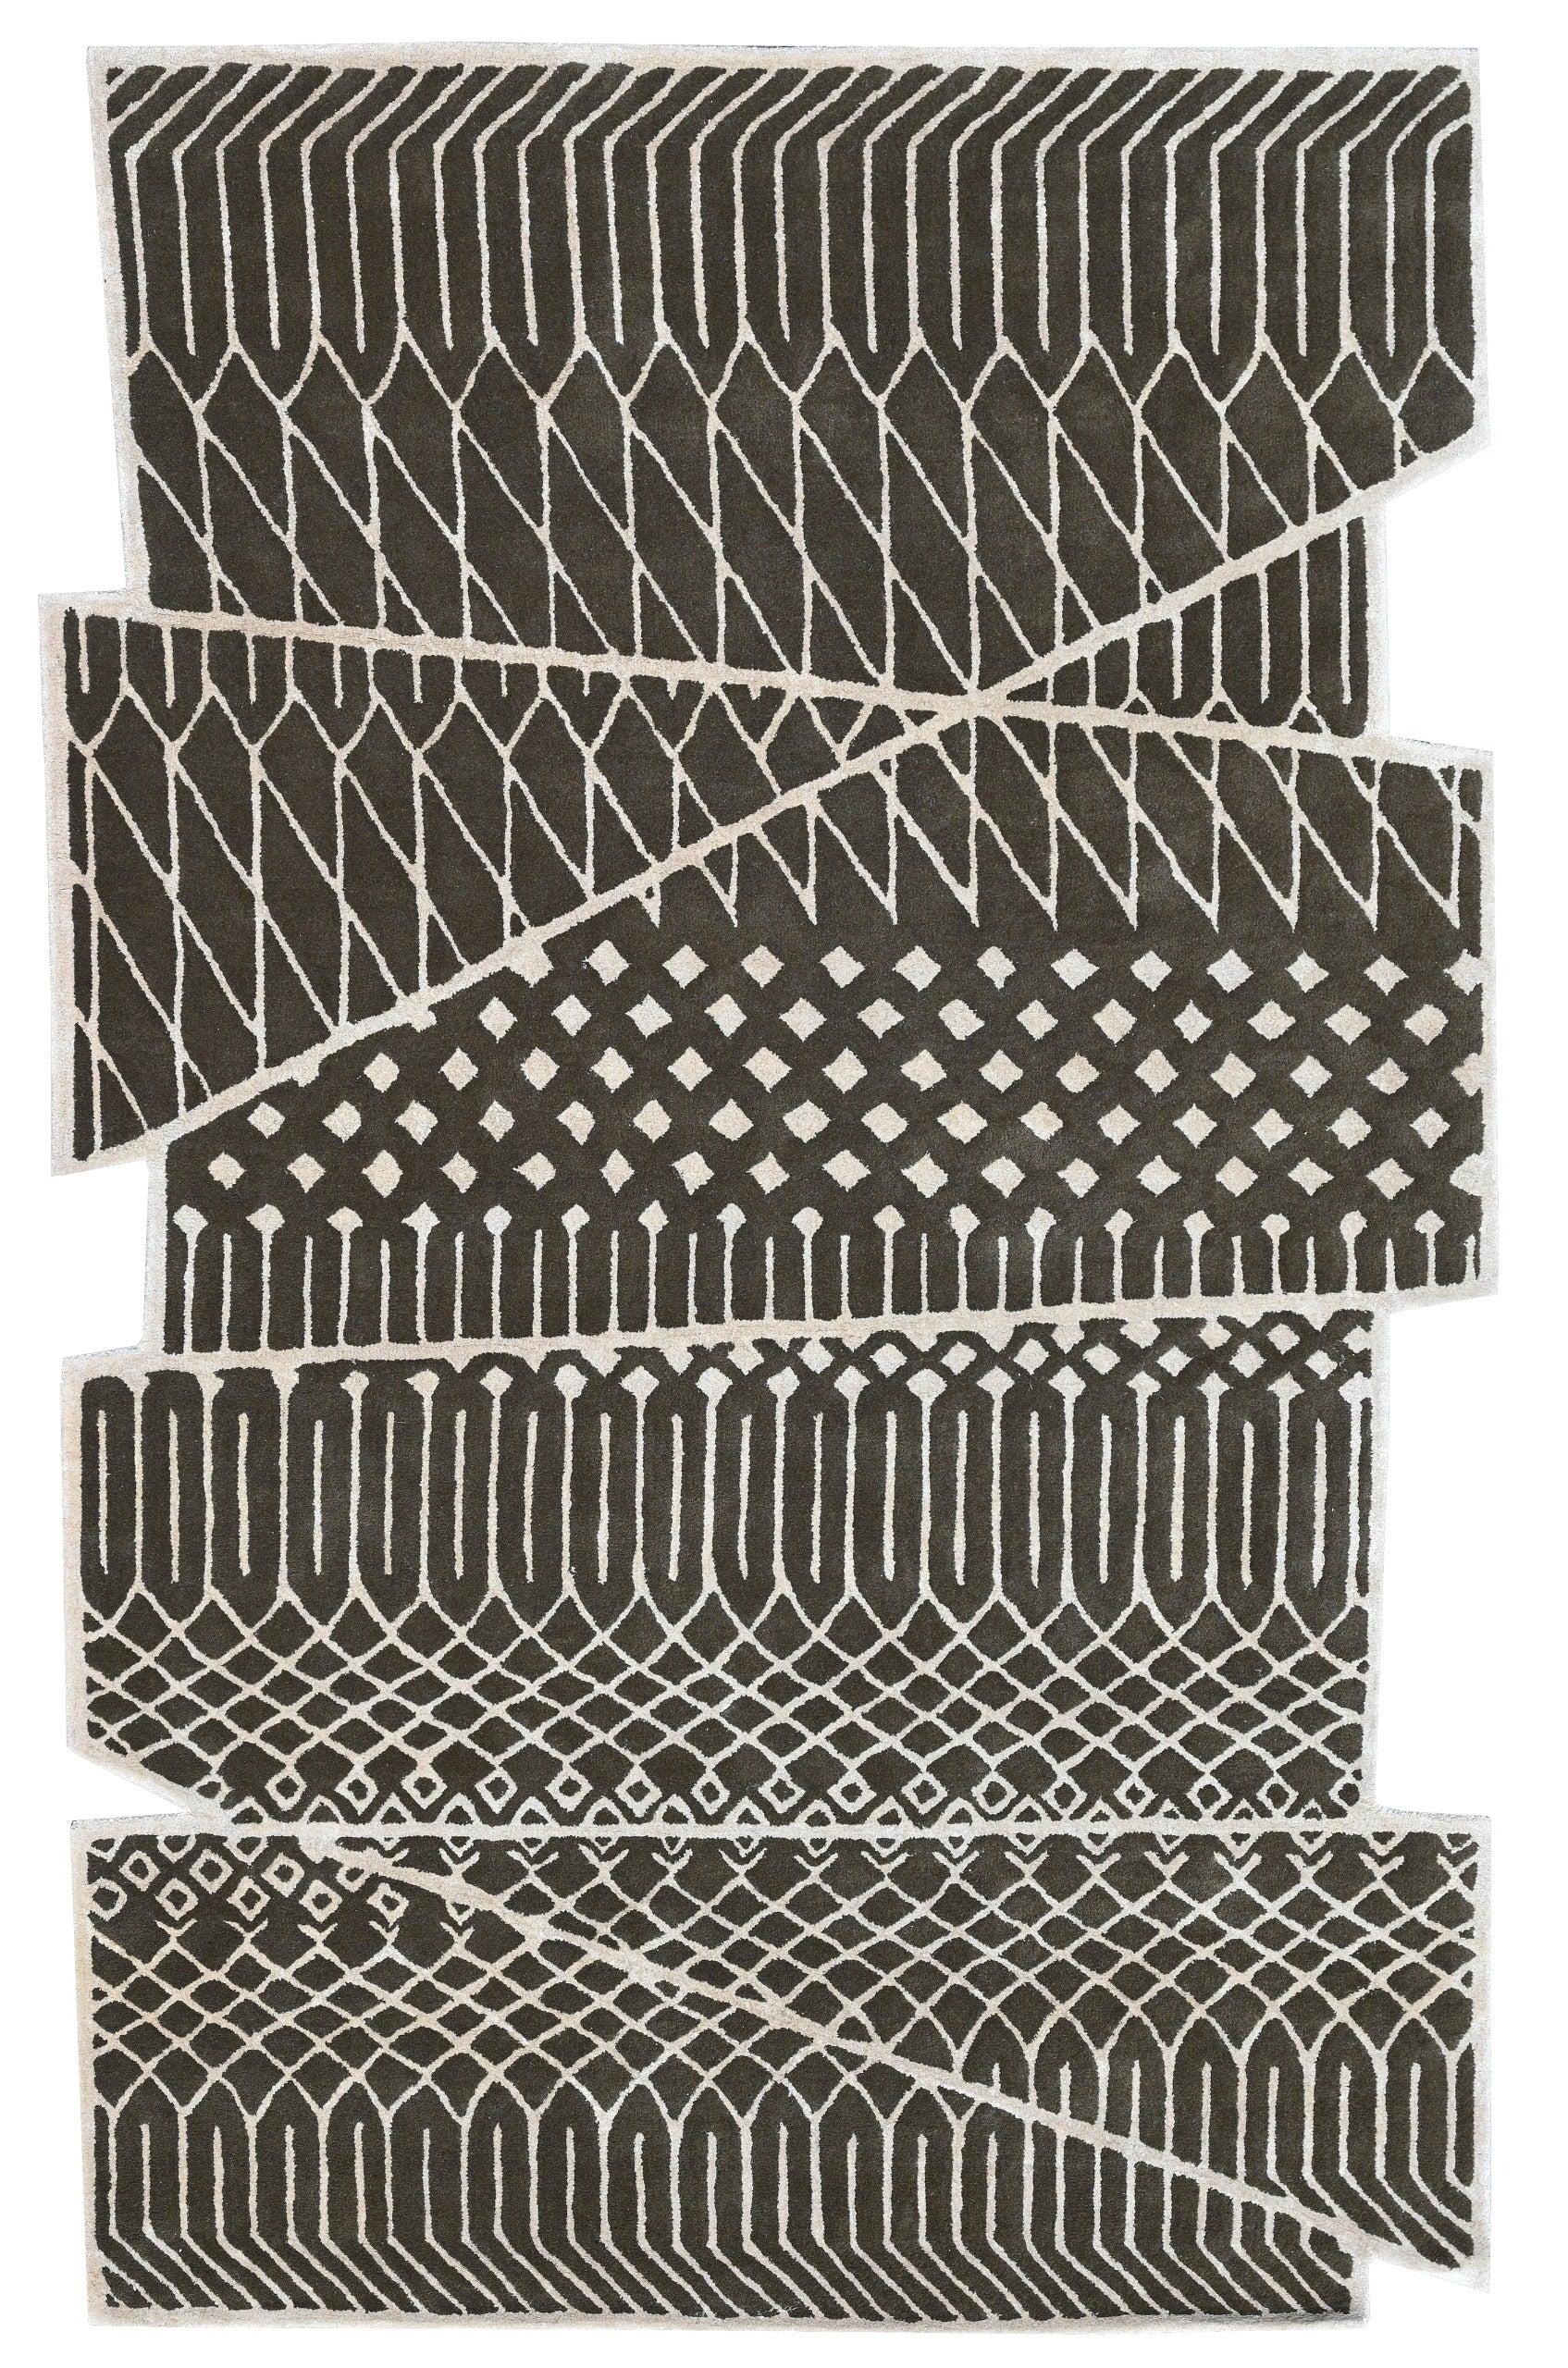 The rich-looking Paradox rug transforms your space into a high drama realm that is at once light-hearted and profound. The pure, natural New Zealand wool with an underlying gleam of Jasmine silk gives it a luxurious feel that keeps you rooted. The Paradox’s 3D cut-out and visually striking B&amp;W criss-cross pattern is both playful and flamboyant. It’s striking geometric design makes a style statement in any space, when draped on a wall or on the floor.